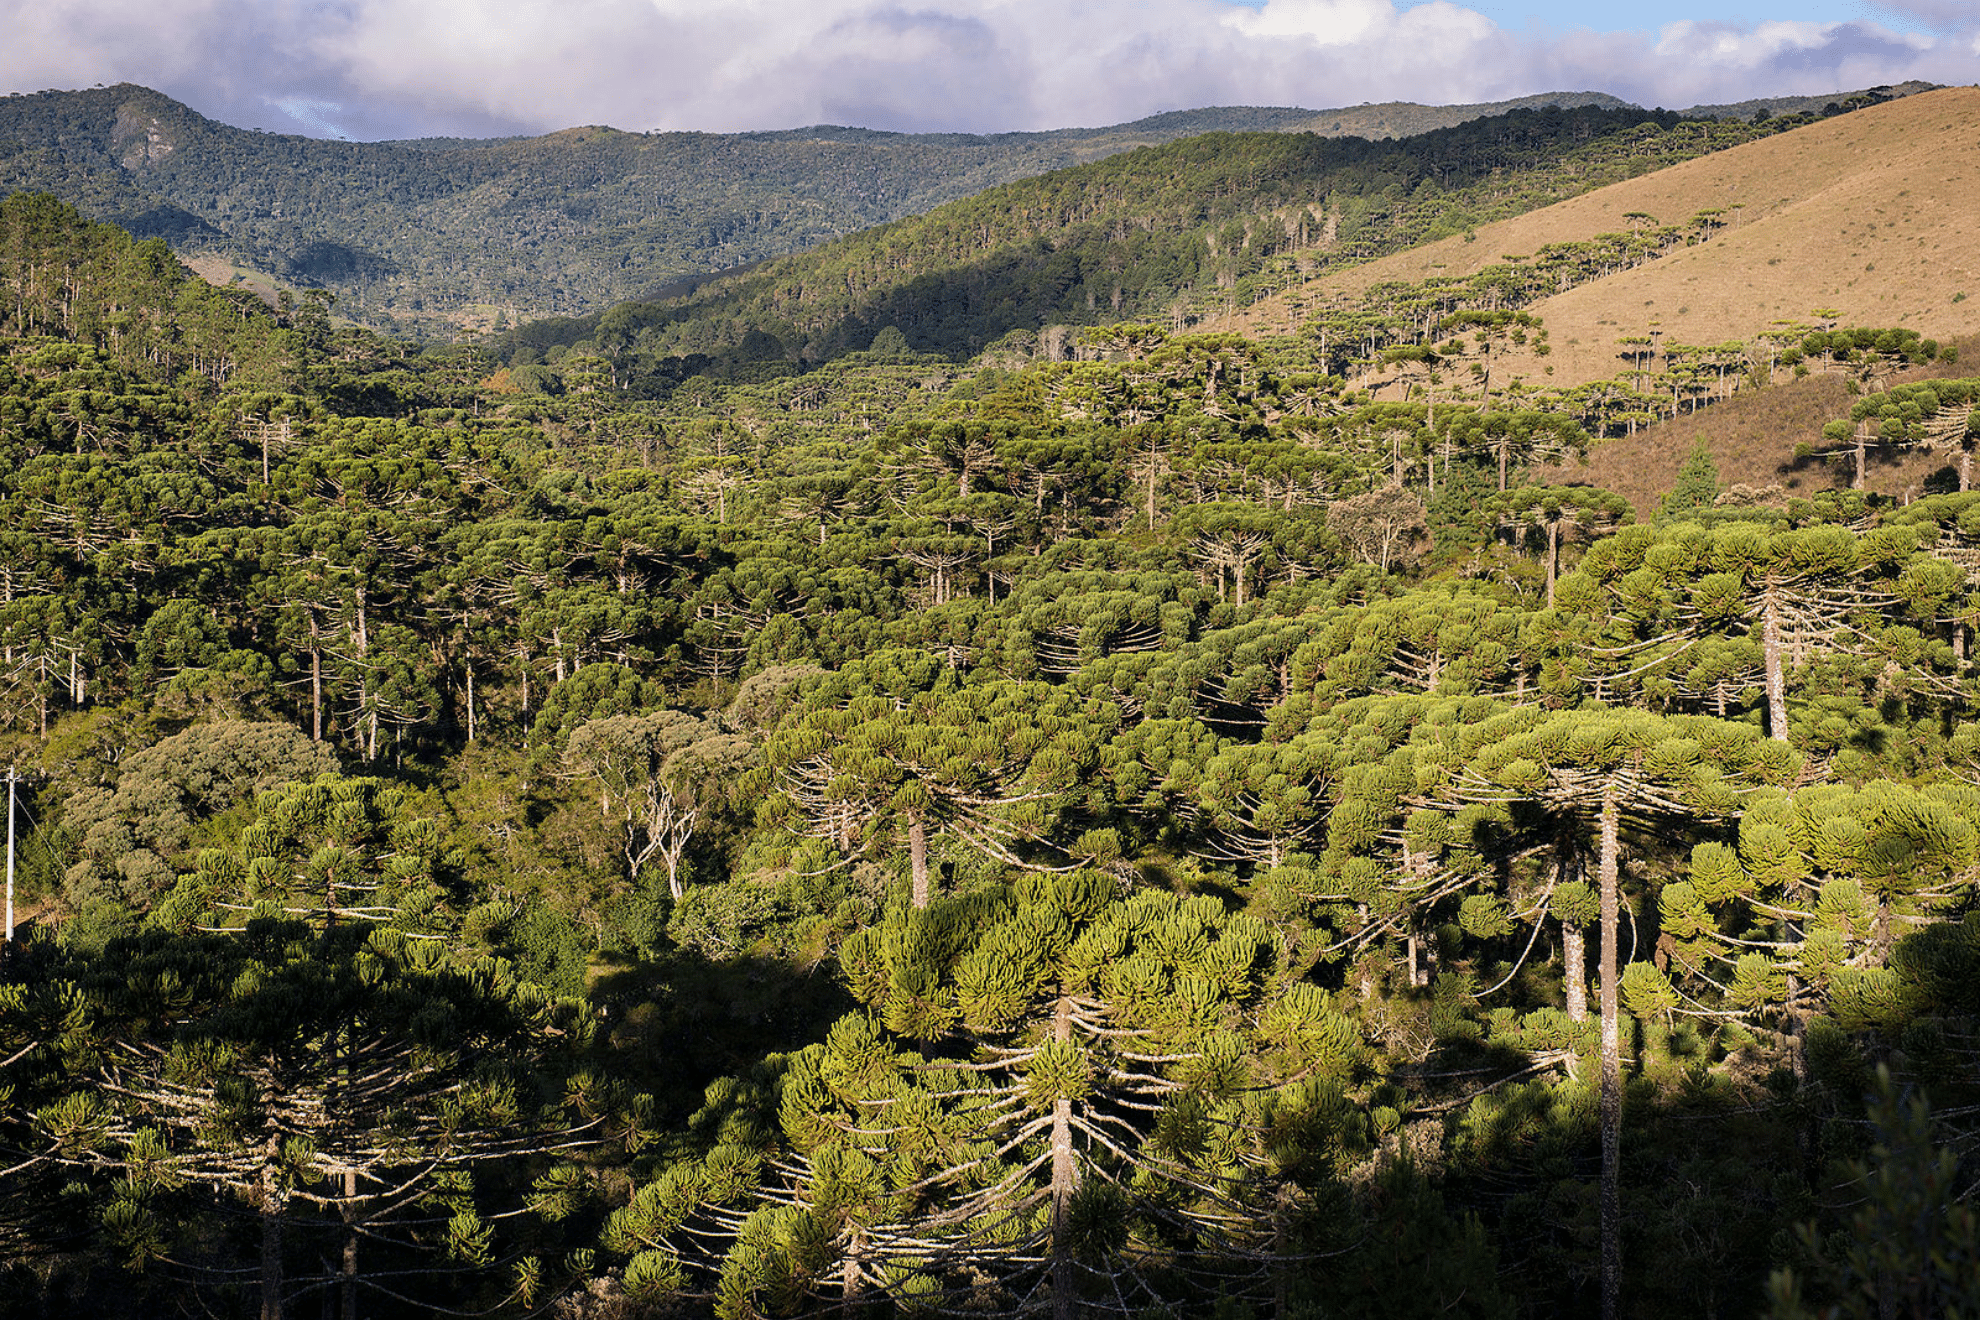 An araucaria forest in a conservation area in Brazil where it is safe from deforestation